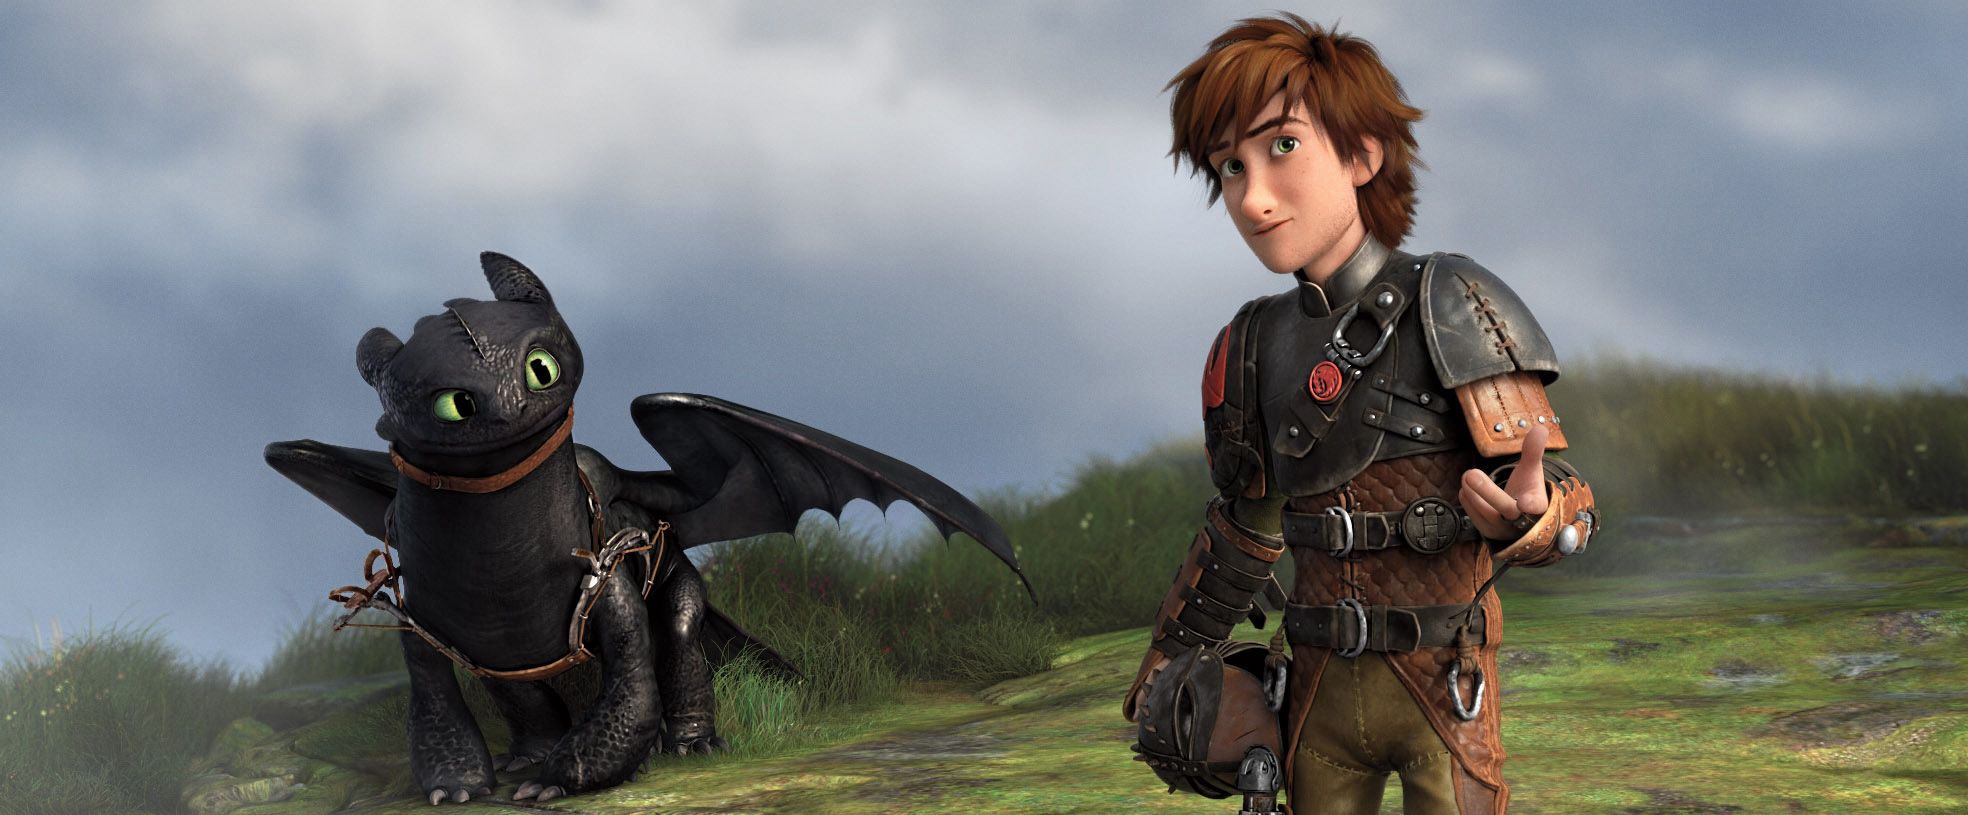 how-to-train-your-dragon-2-hiccup-toothless